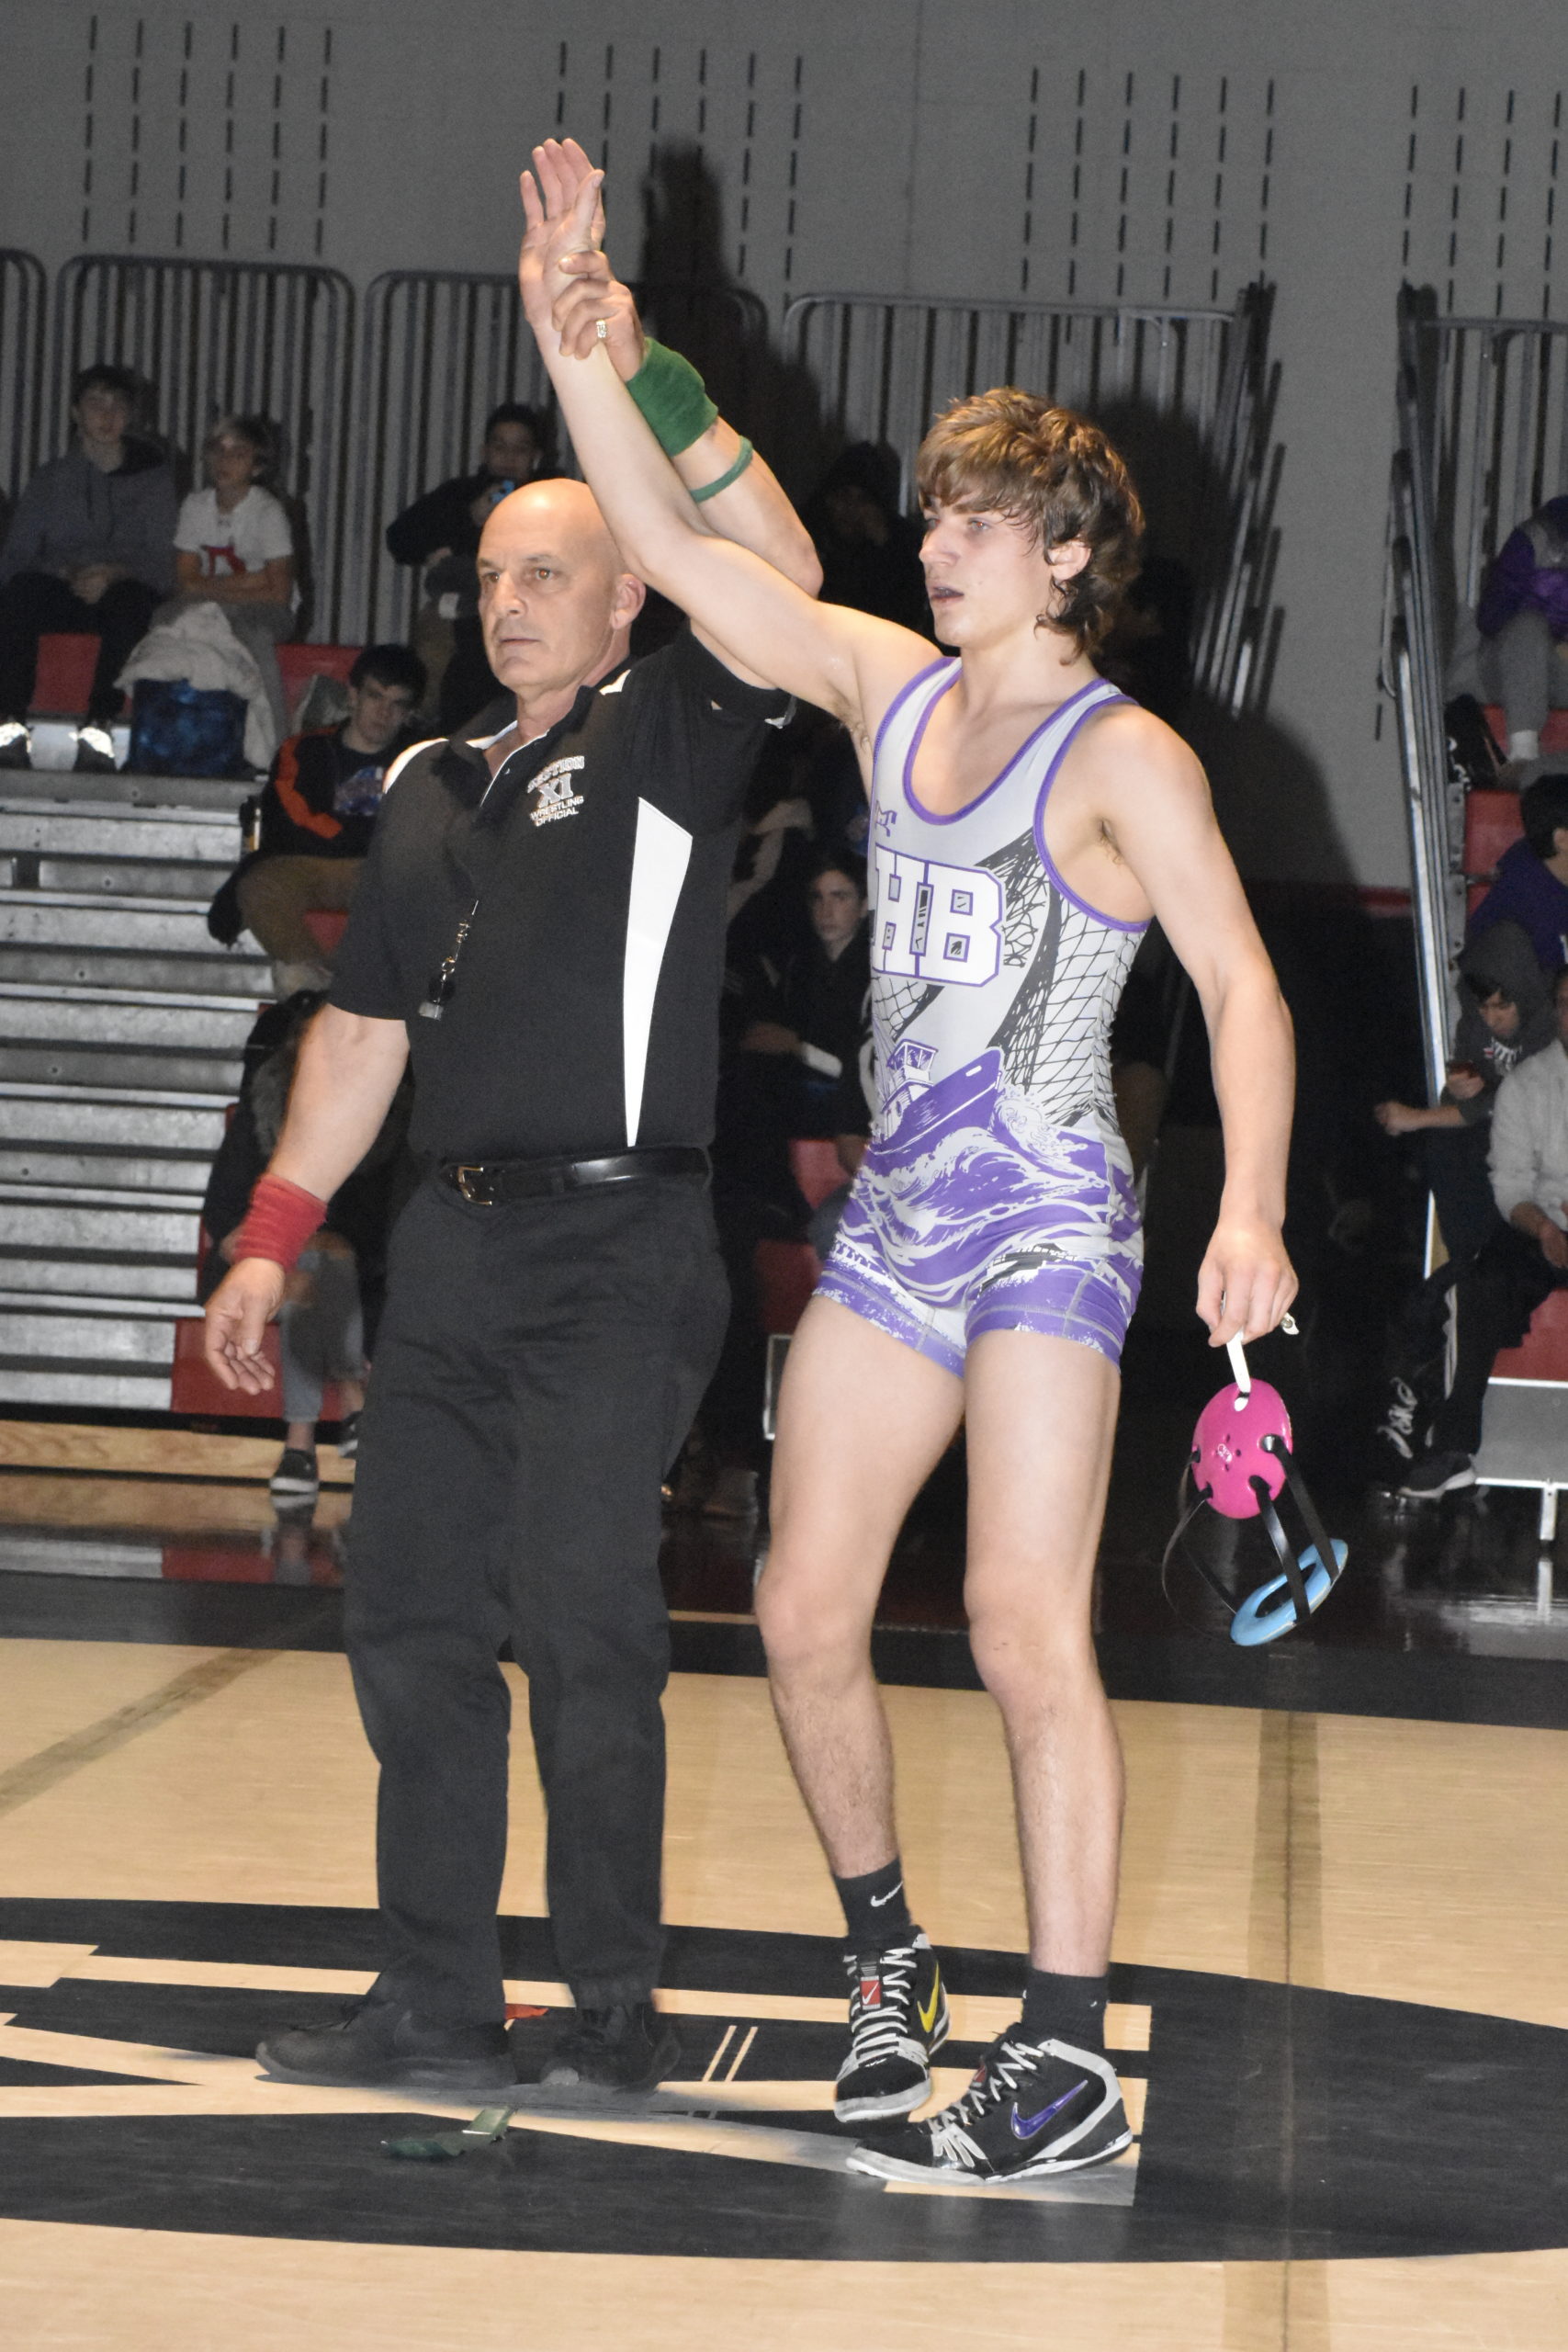 Hampton Bays senior Willy Kraus became a two-time county champion after defeating Mount Sinai's Ryan Shanian, 9-0, on Friday night.